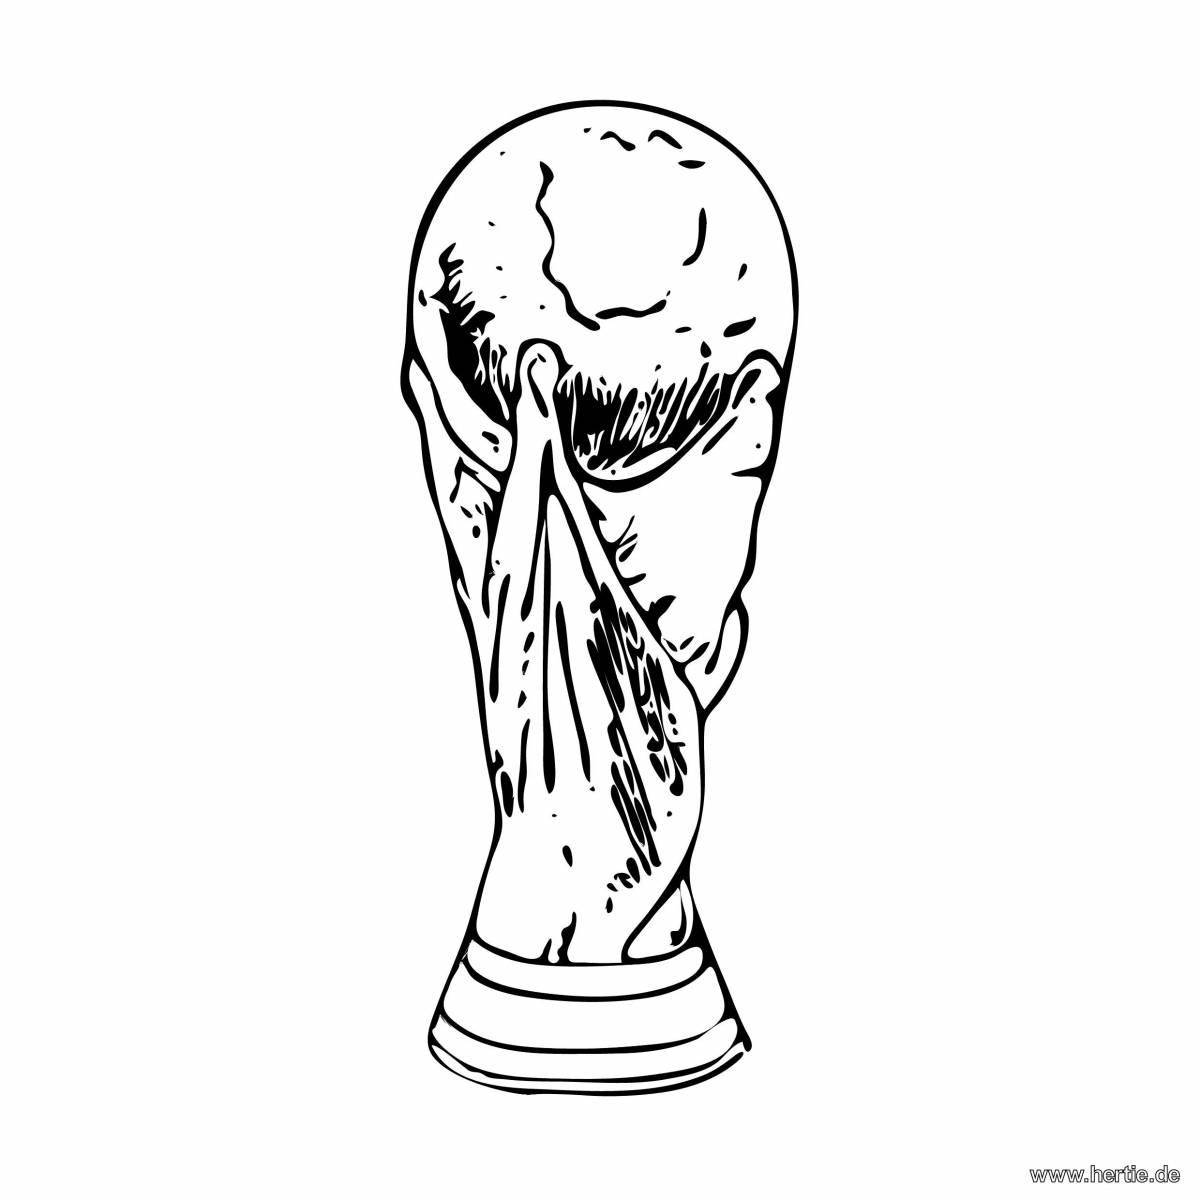 2022 World Cup adorable coloring book